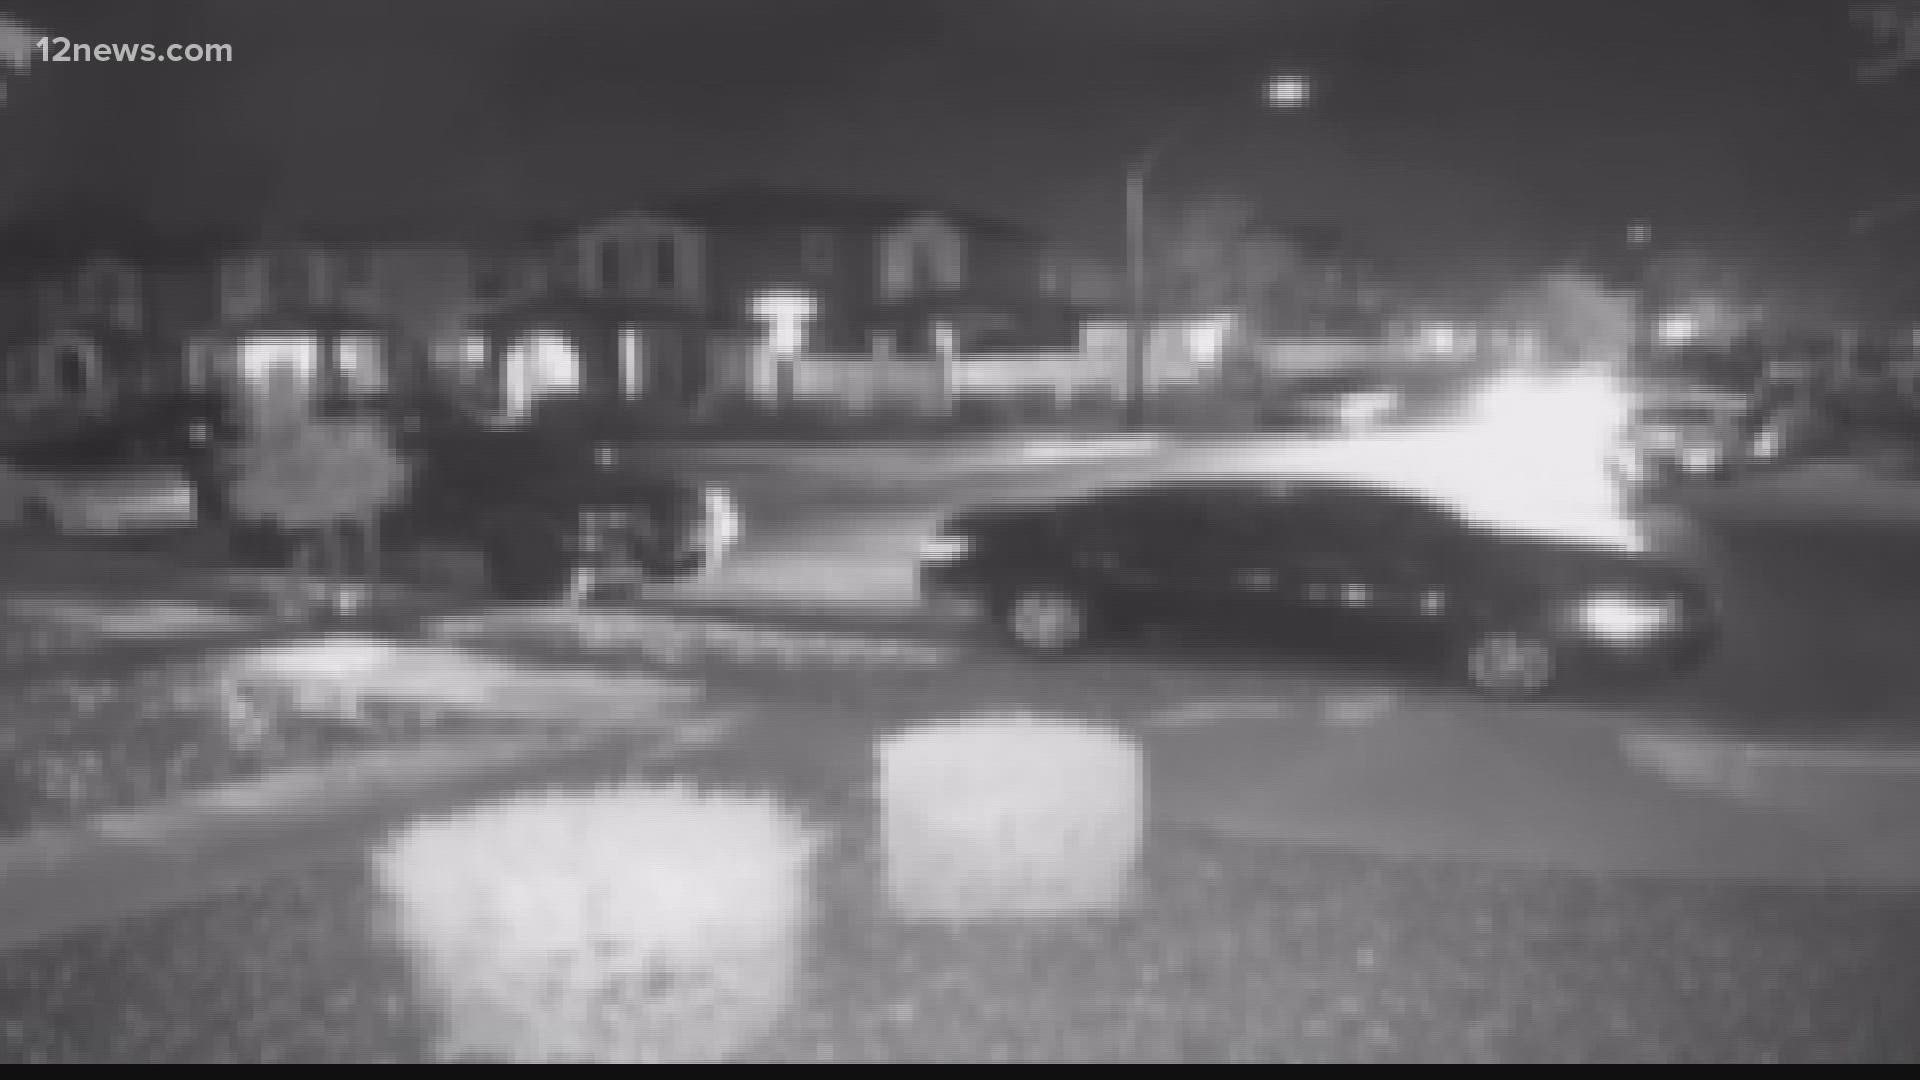 A Gilbert neighborhood is on alert after shots were fired at a home with a family inside. The terrifying moment was caught on a neighbor's security camera.